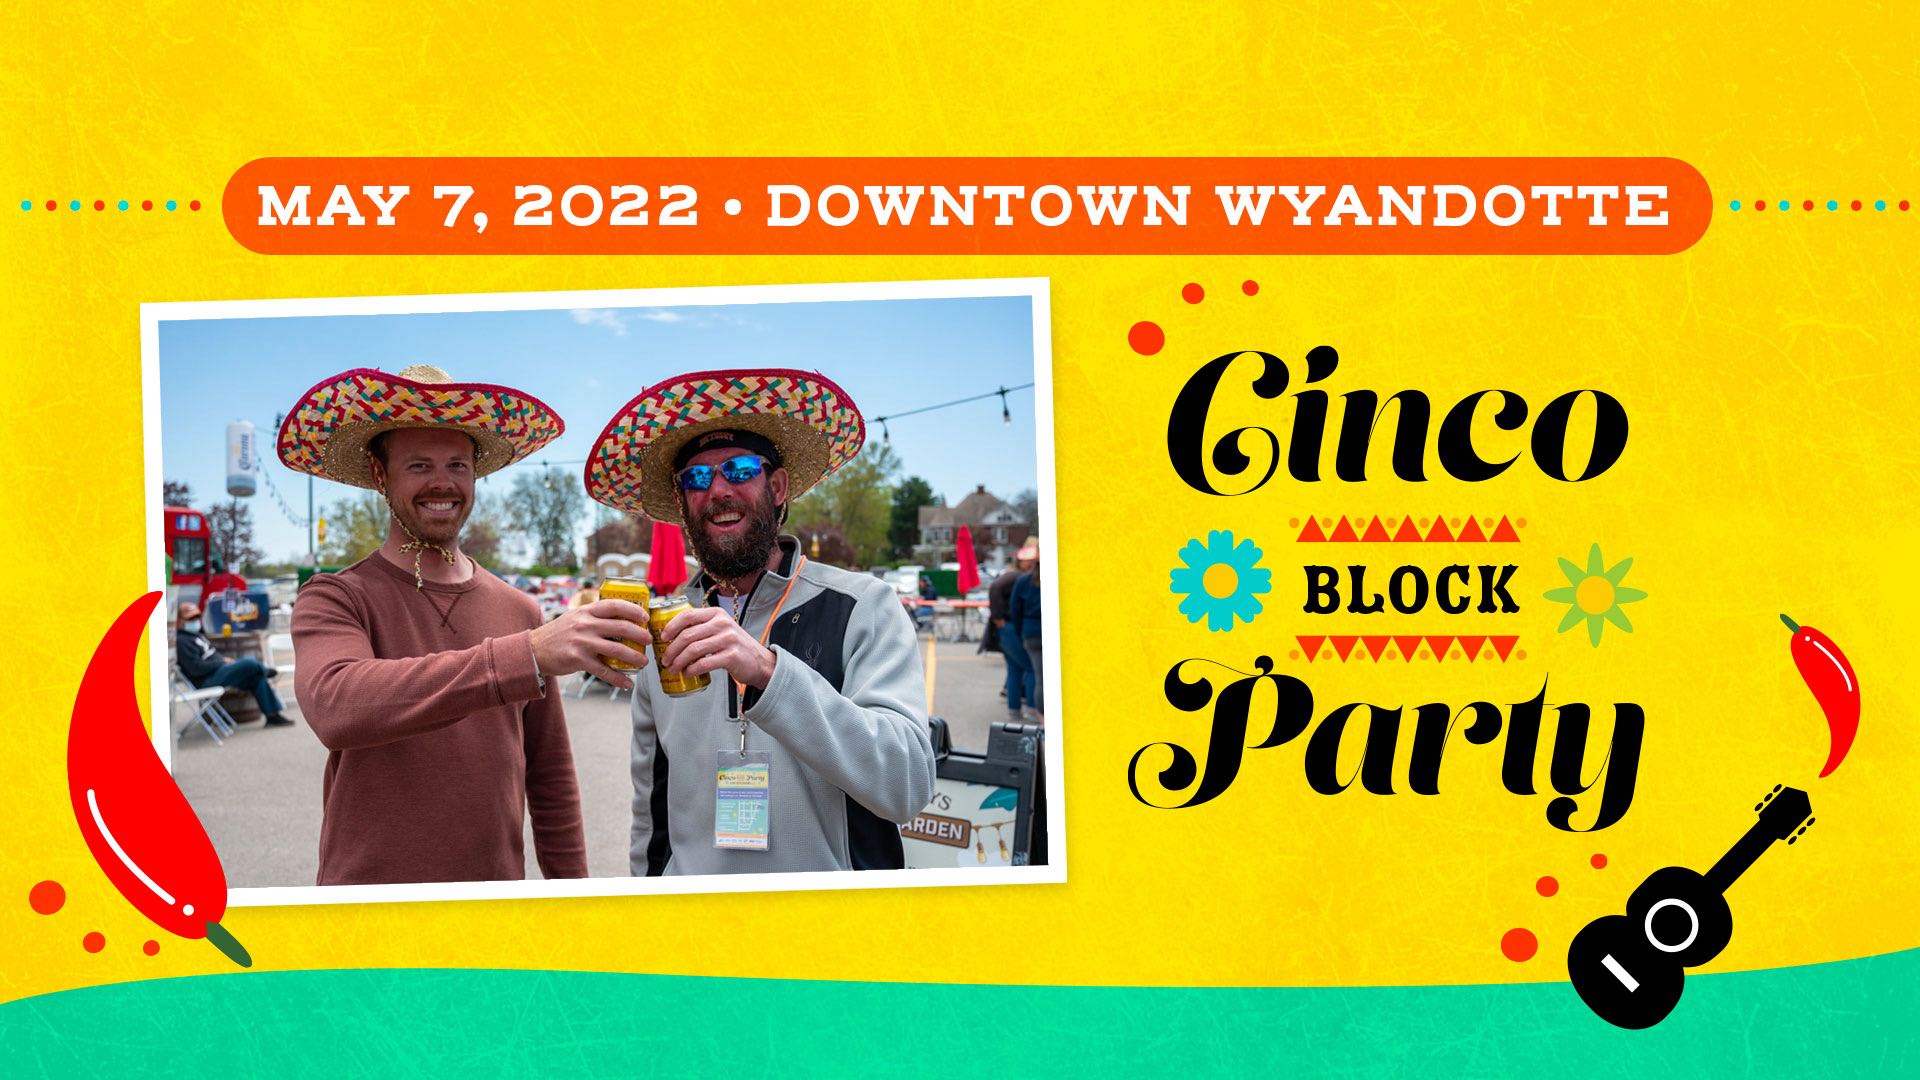 Cinco Block Party – May 7, 2022 in Downtown Wyandotte; two men is sombreros hitting beer cans together